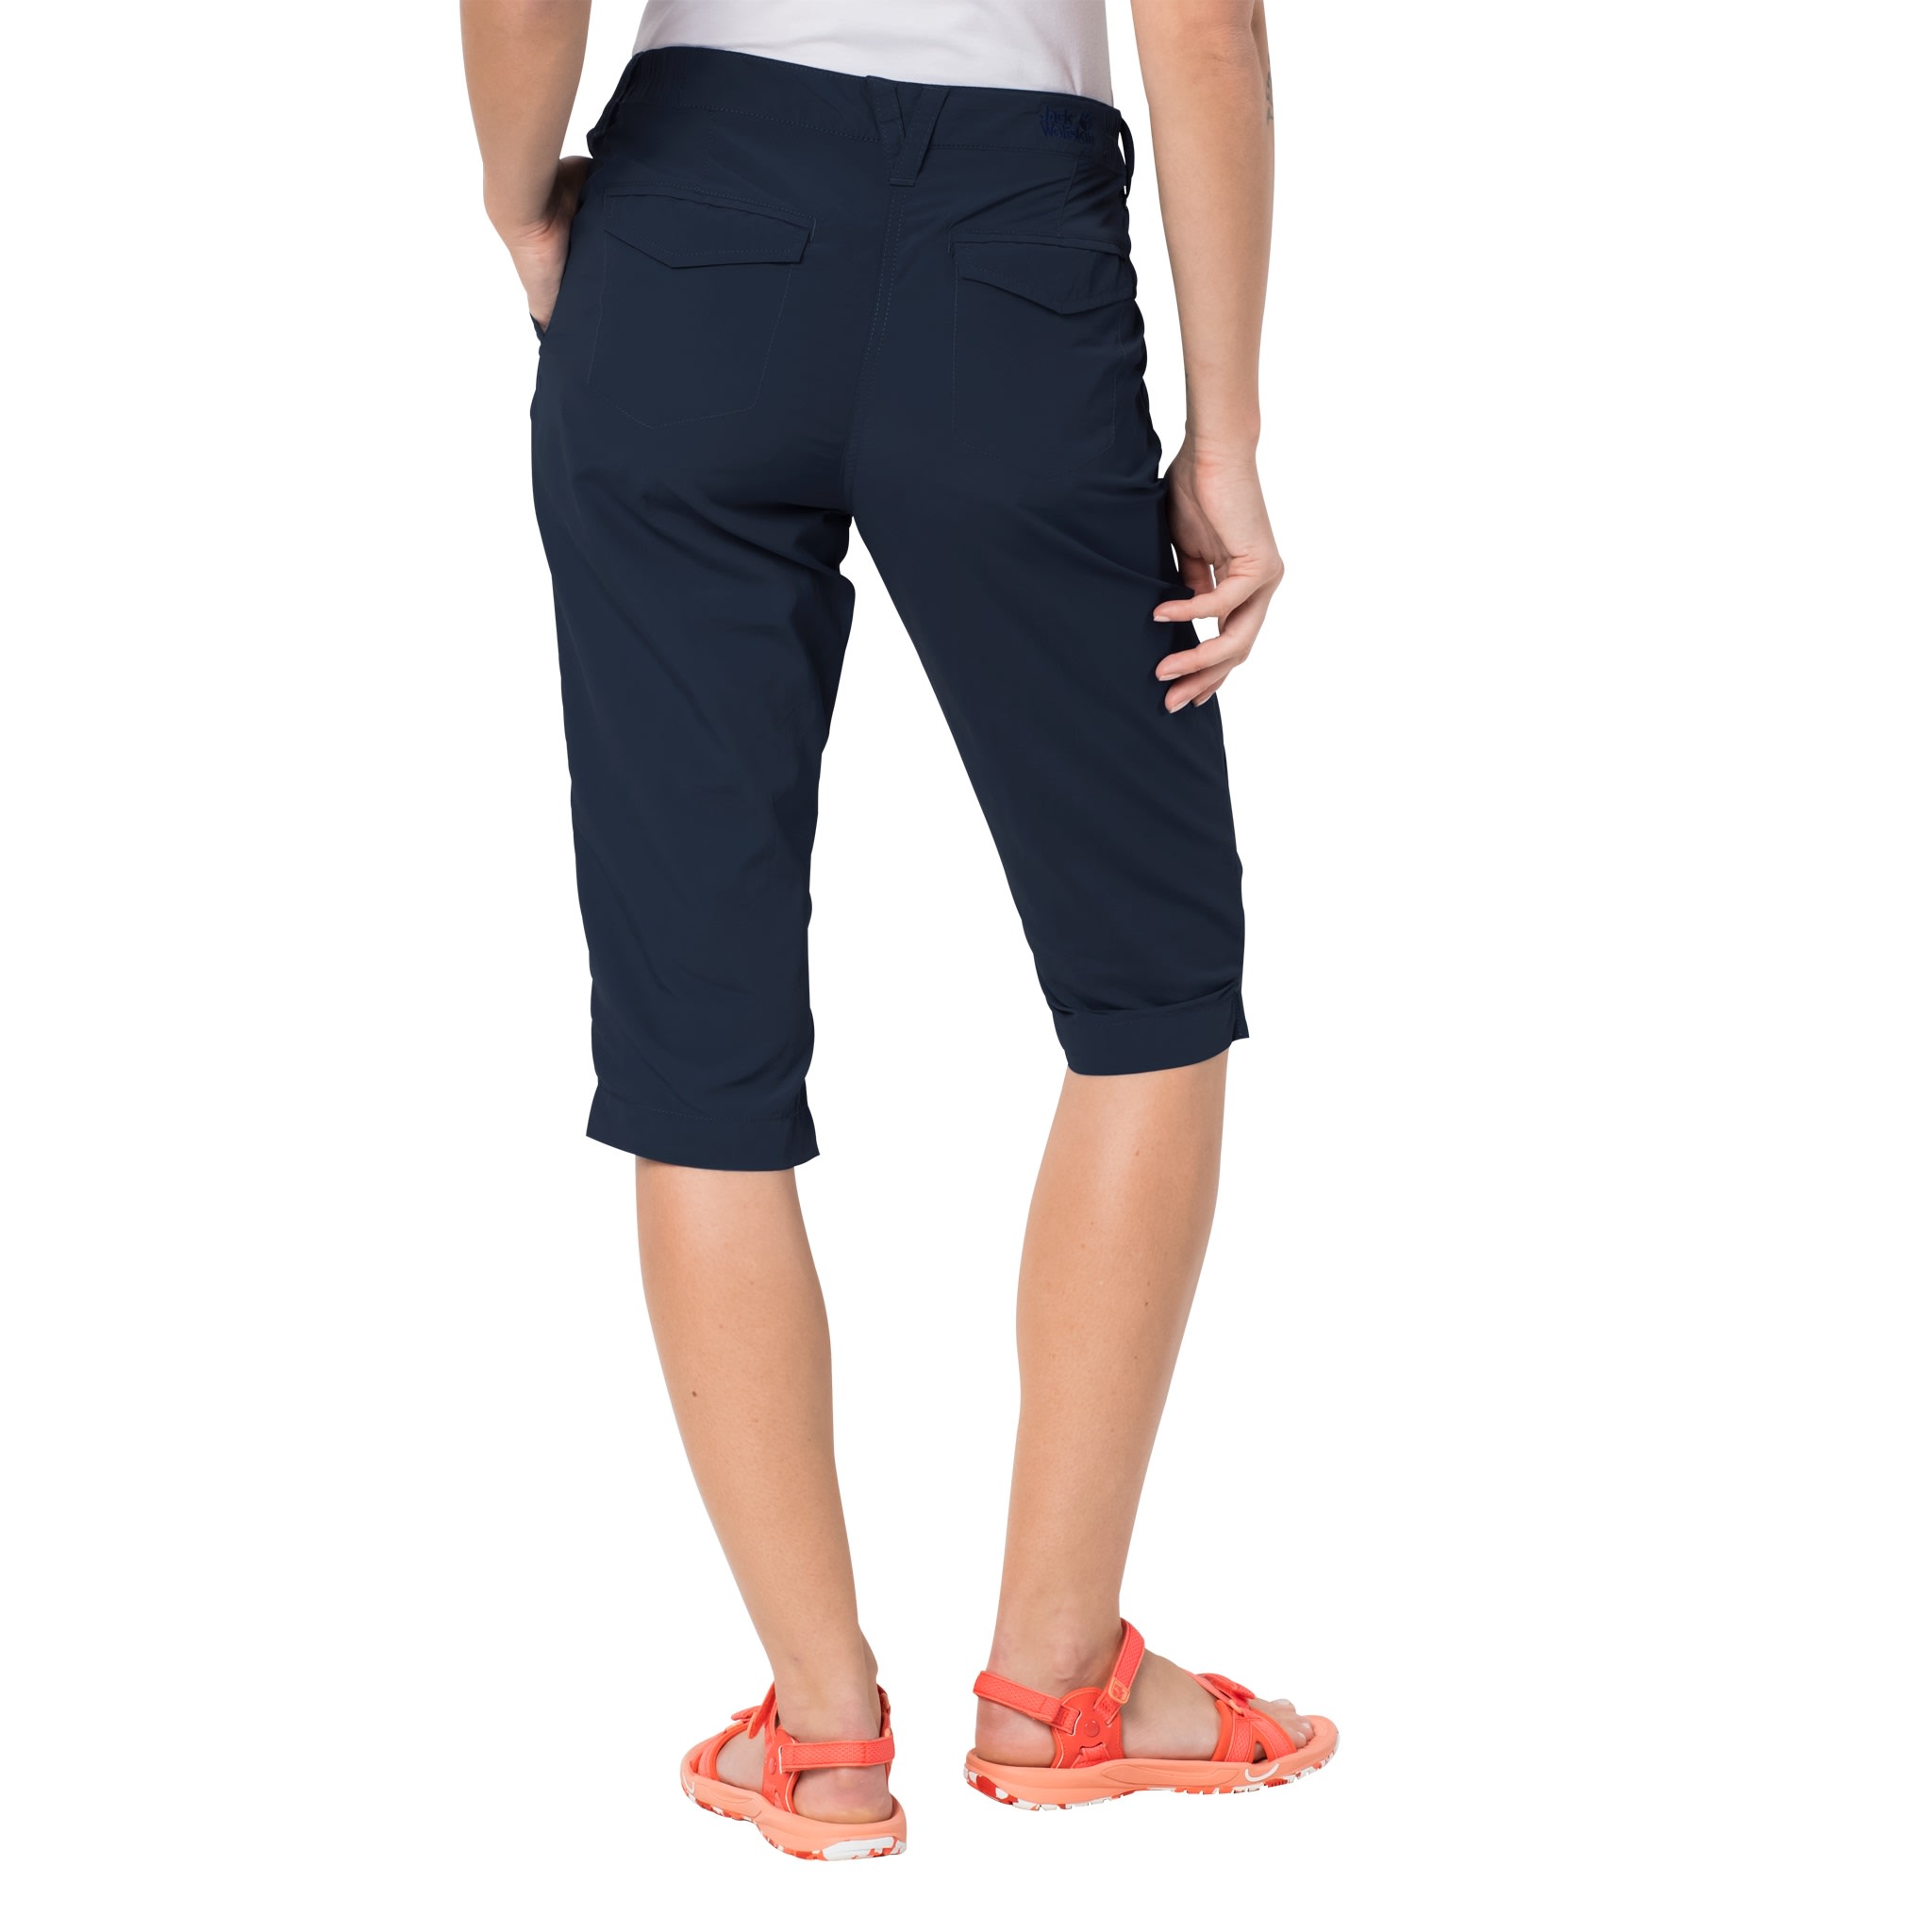 ZAYDA- 3/4 Pants with Buttons - Harmonygirl.com